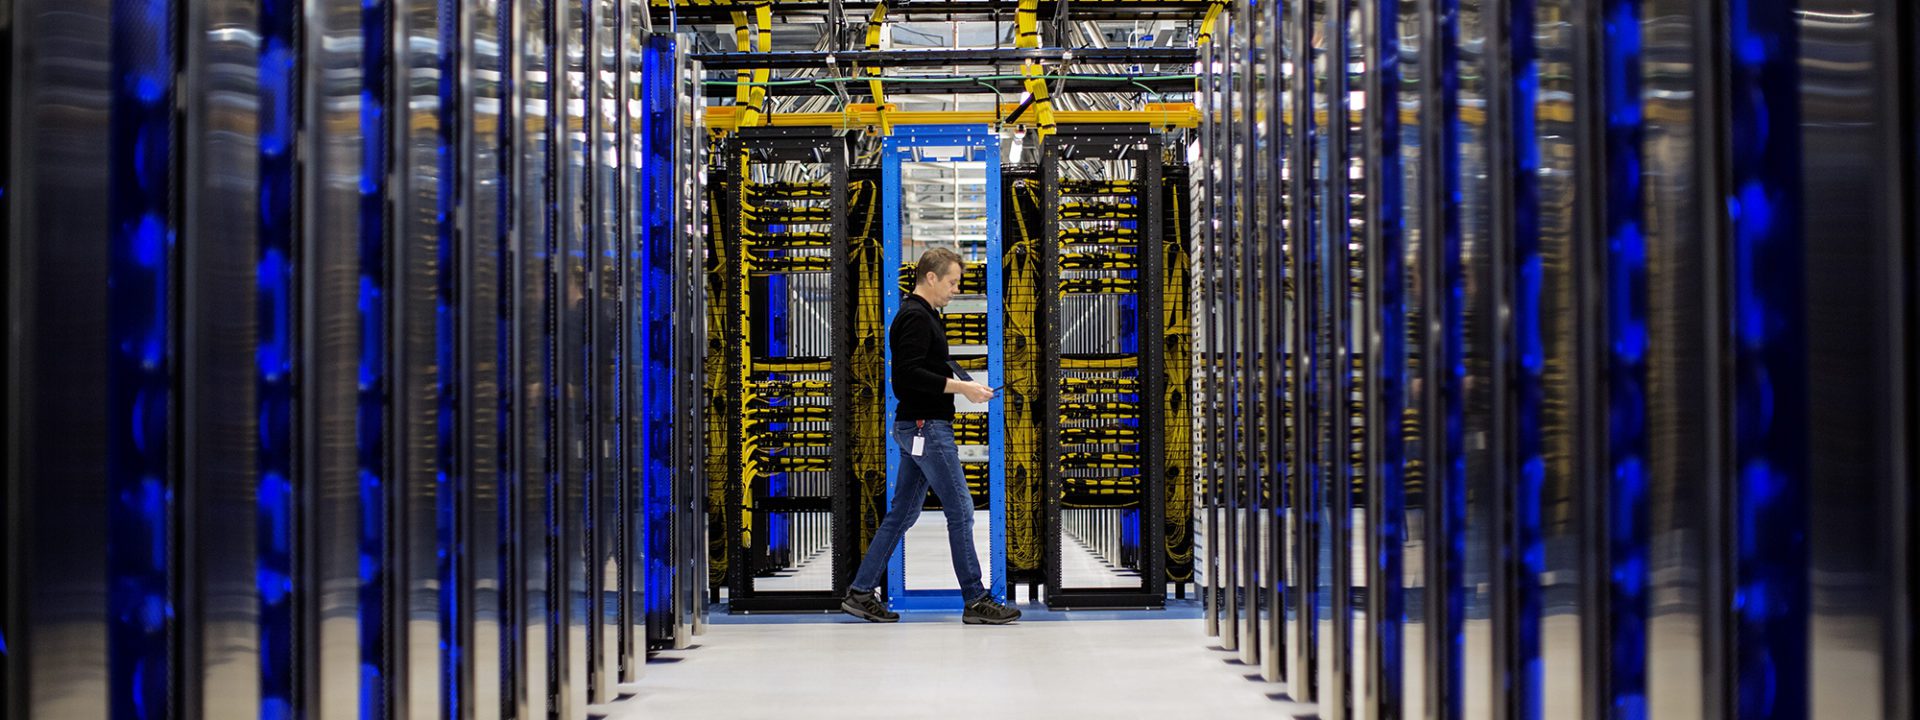 Microsoft job posting signals commitment to small nuclear reactors for powering data centers